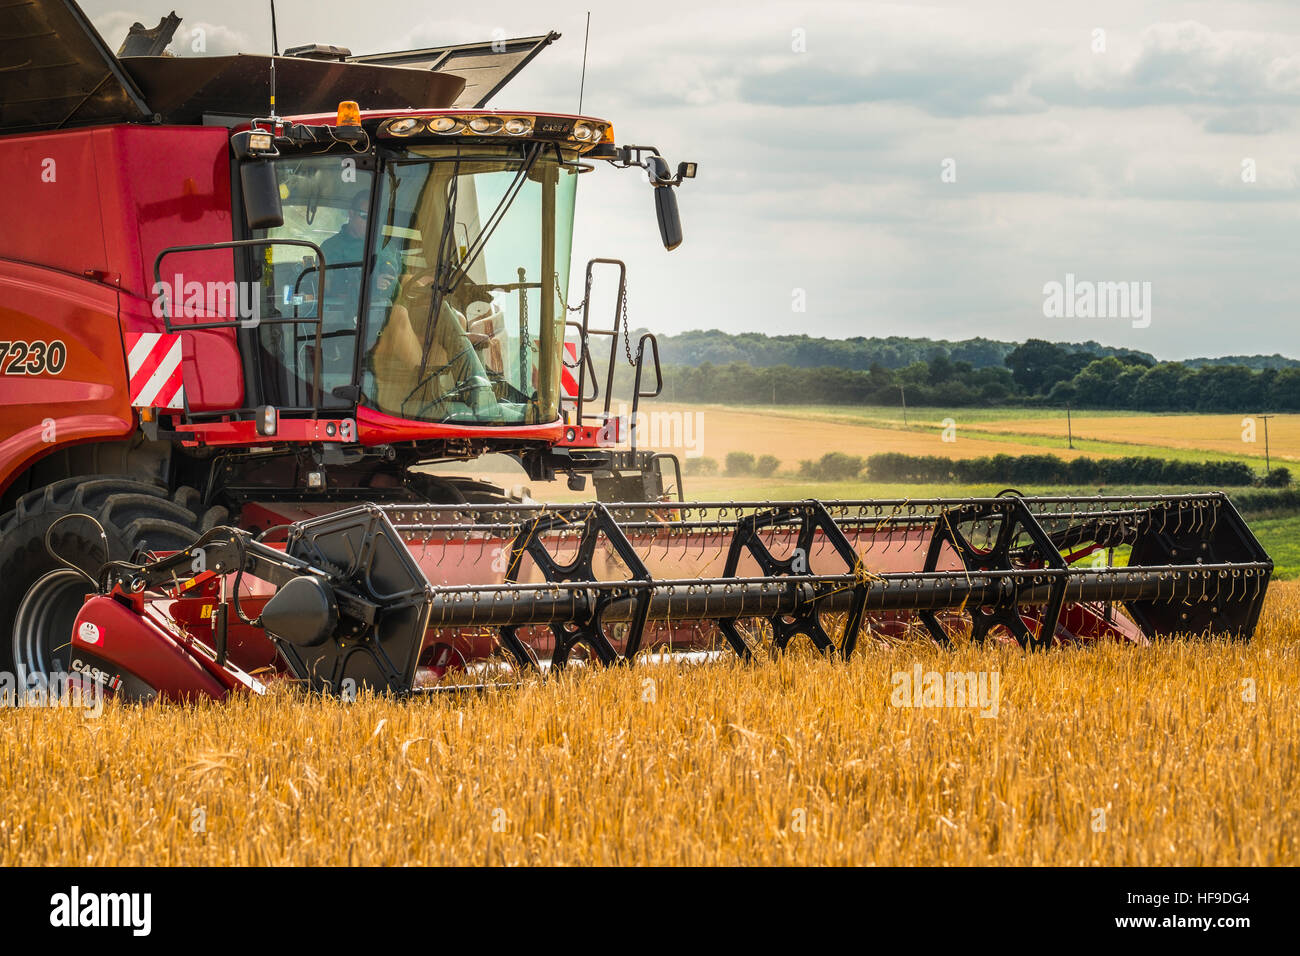 Combining a large barley field. Stock Photo